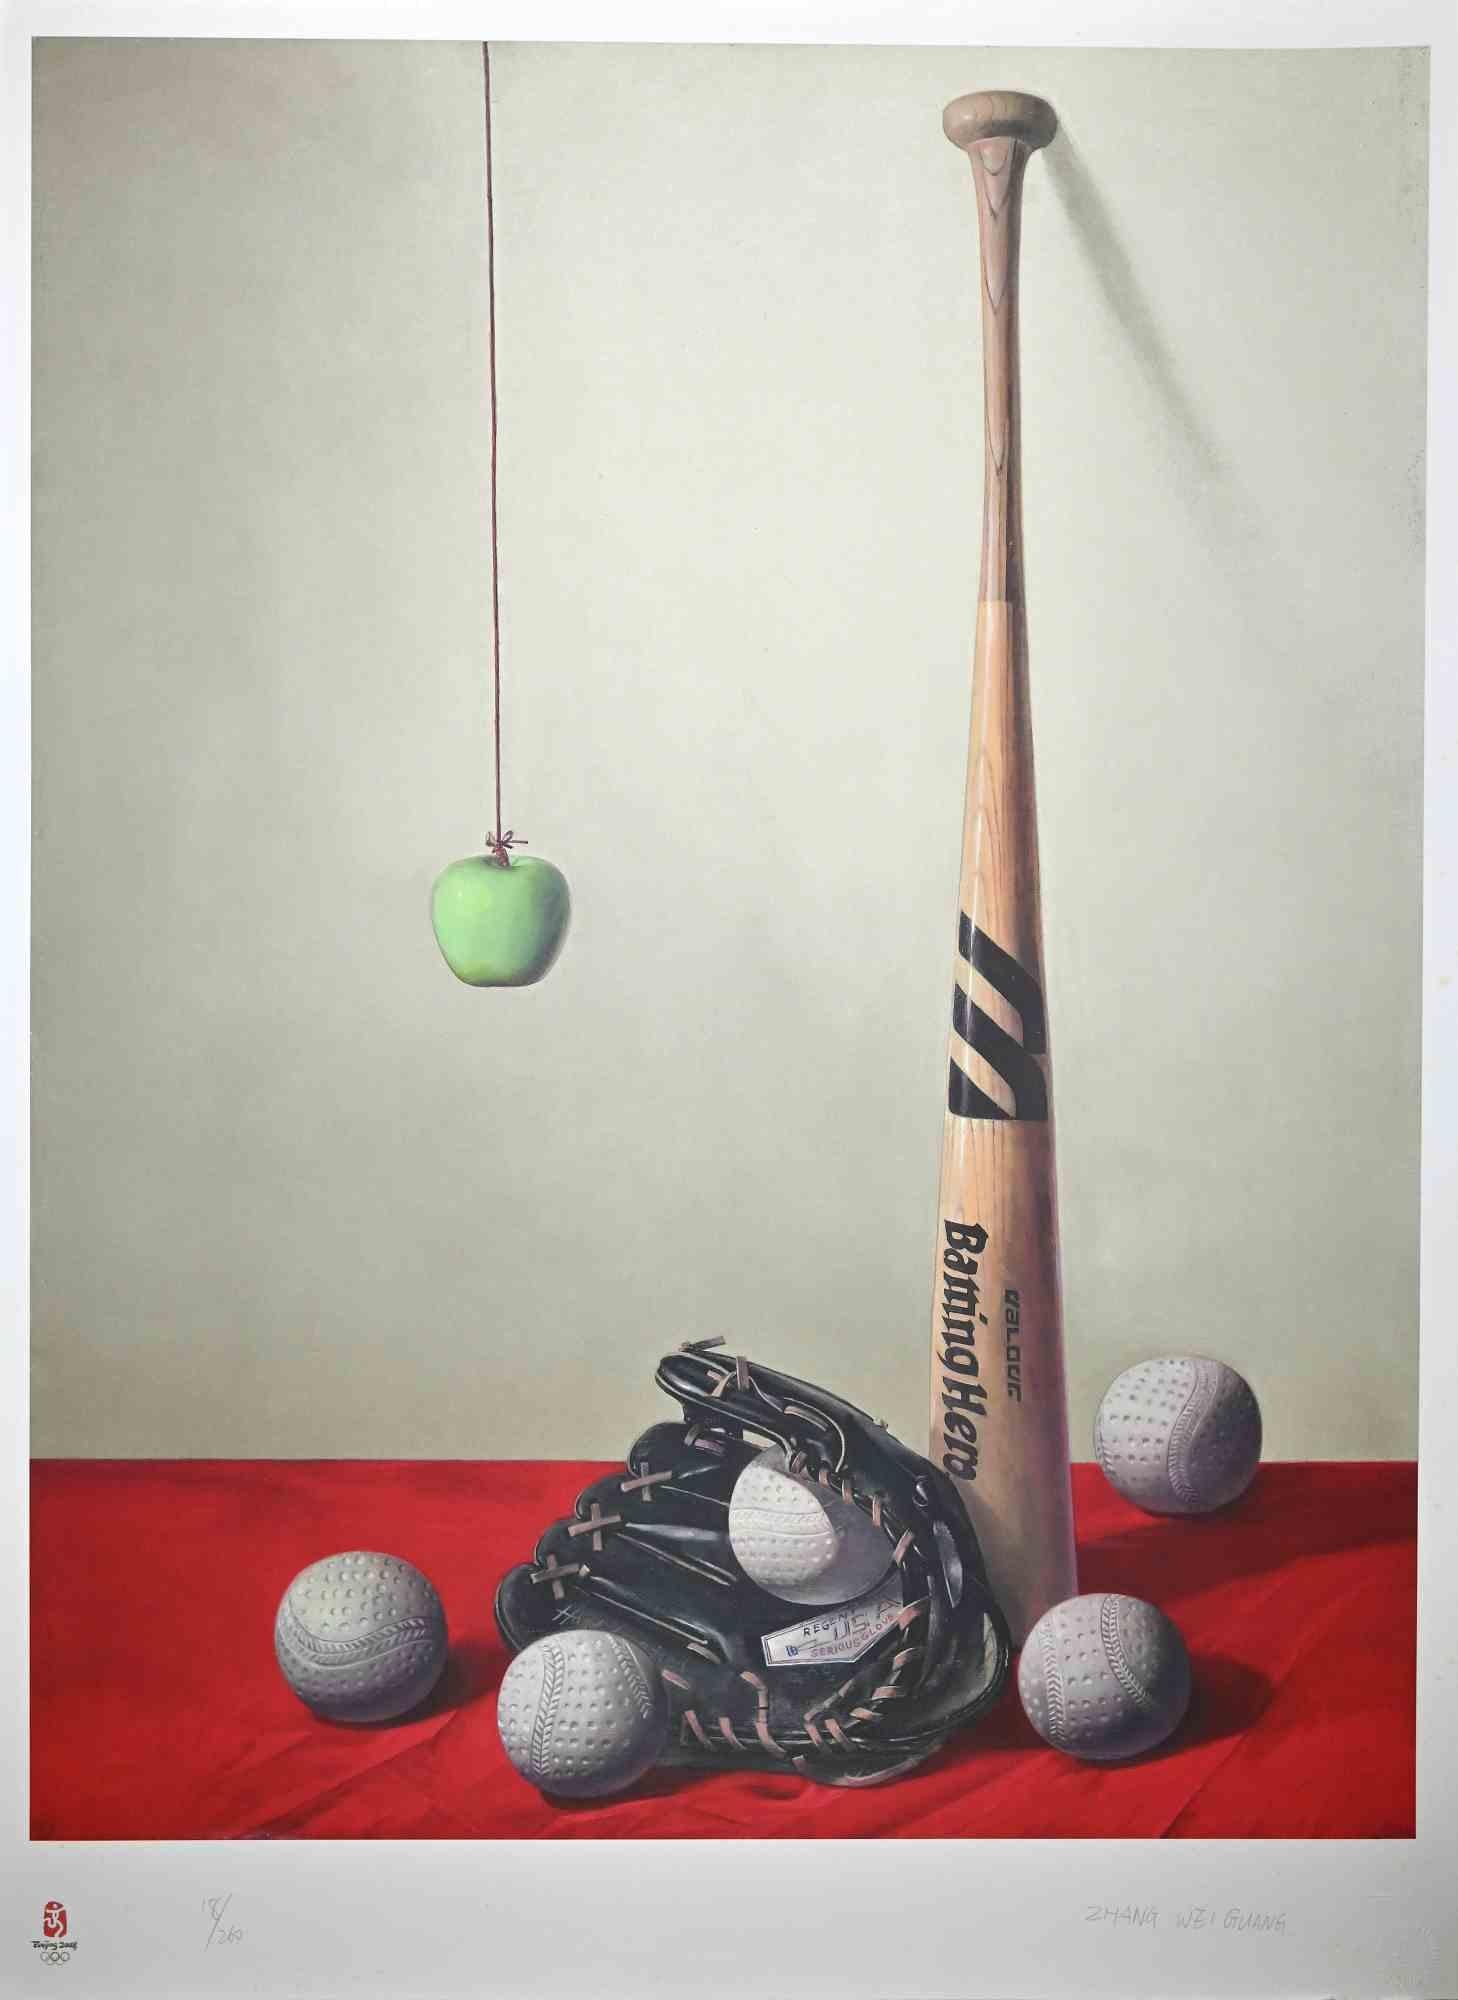 Baseball (Olympic Games Beijing 2008) is an original lithography print realized by Zhang Wei Guang (Mirror). 
This artwork is from the portfolio The Unique Collection for the Olympic Fine Arts 2008 presented during the Olympic Games and produced in